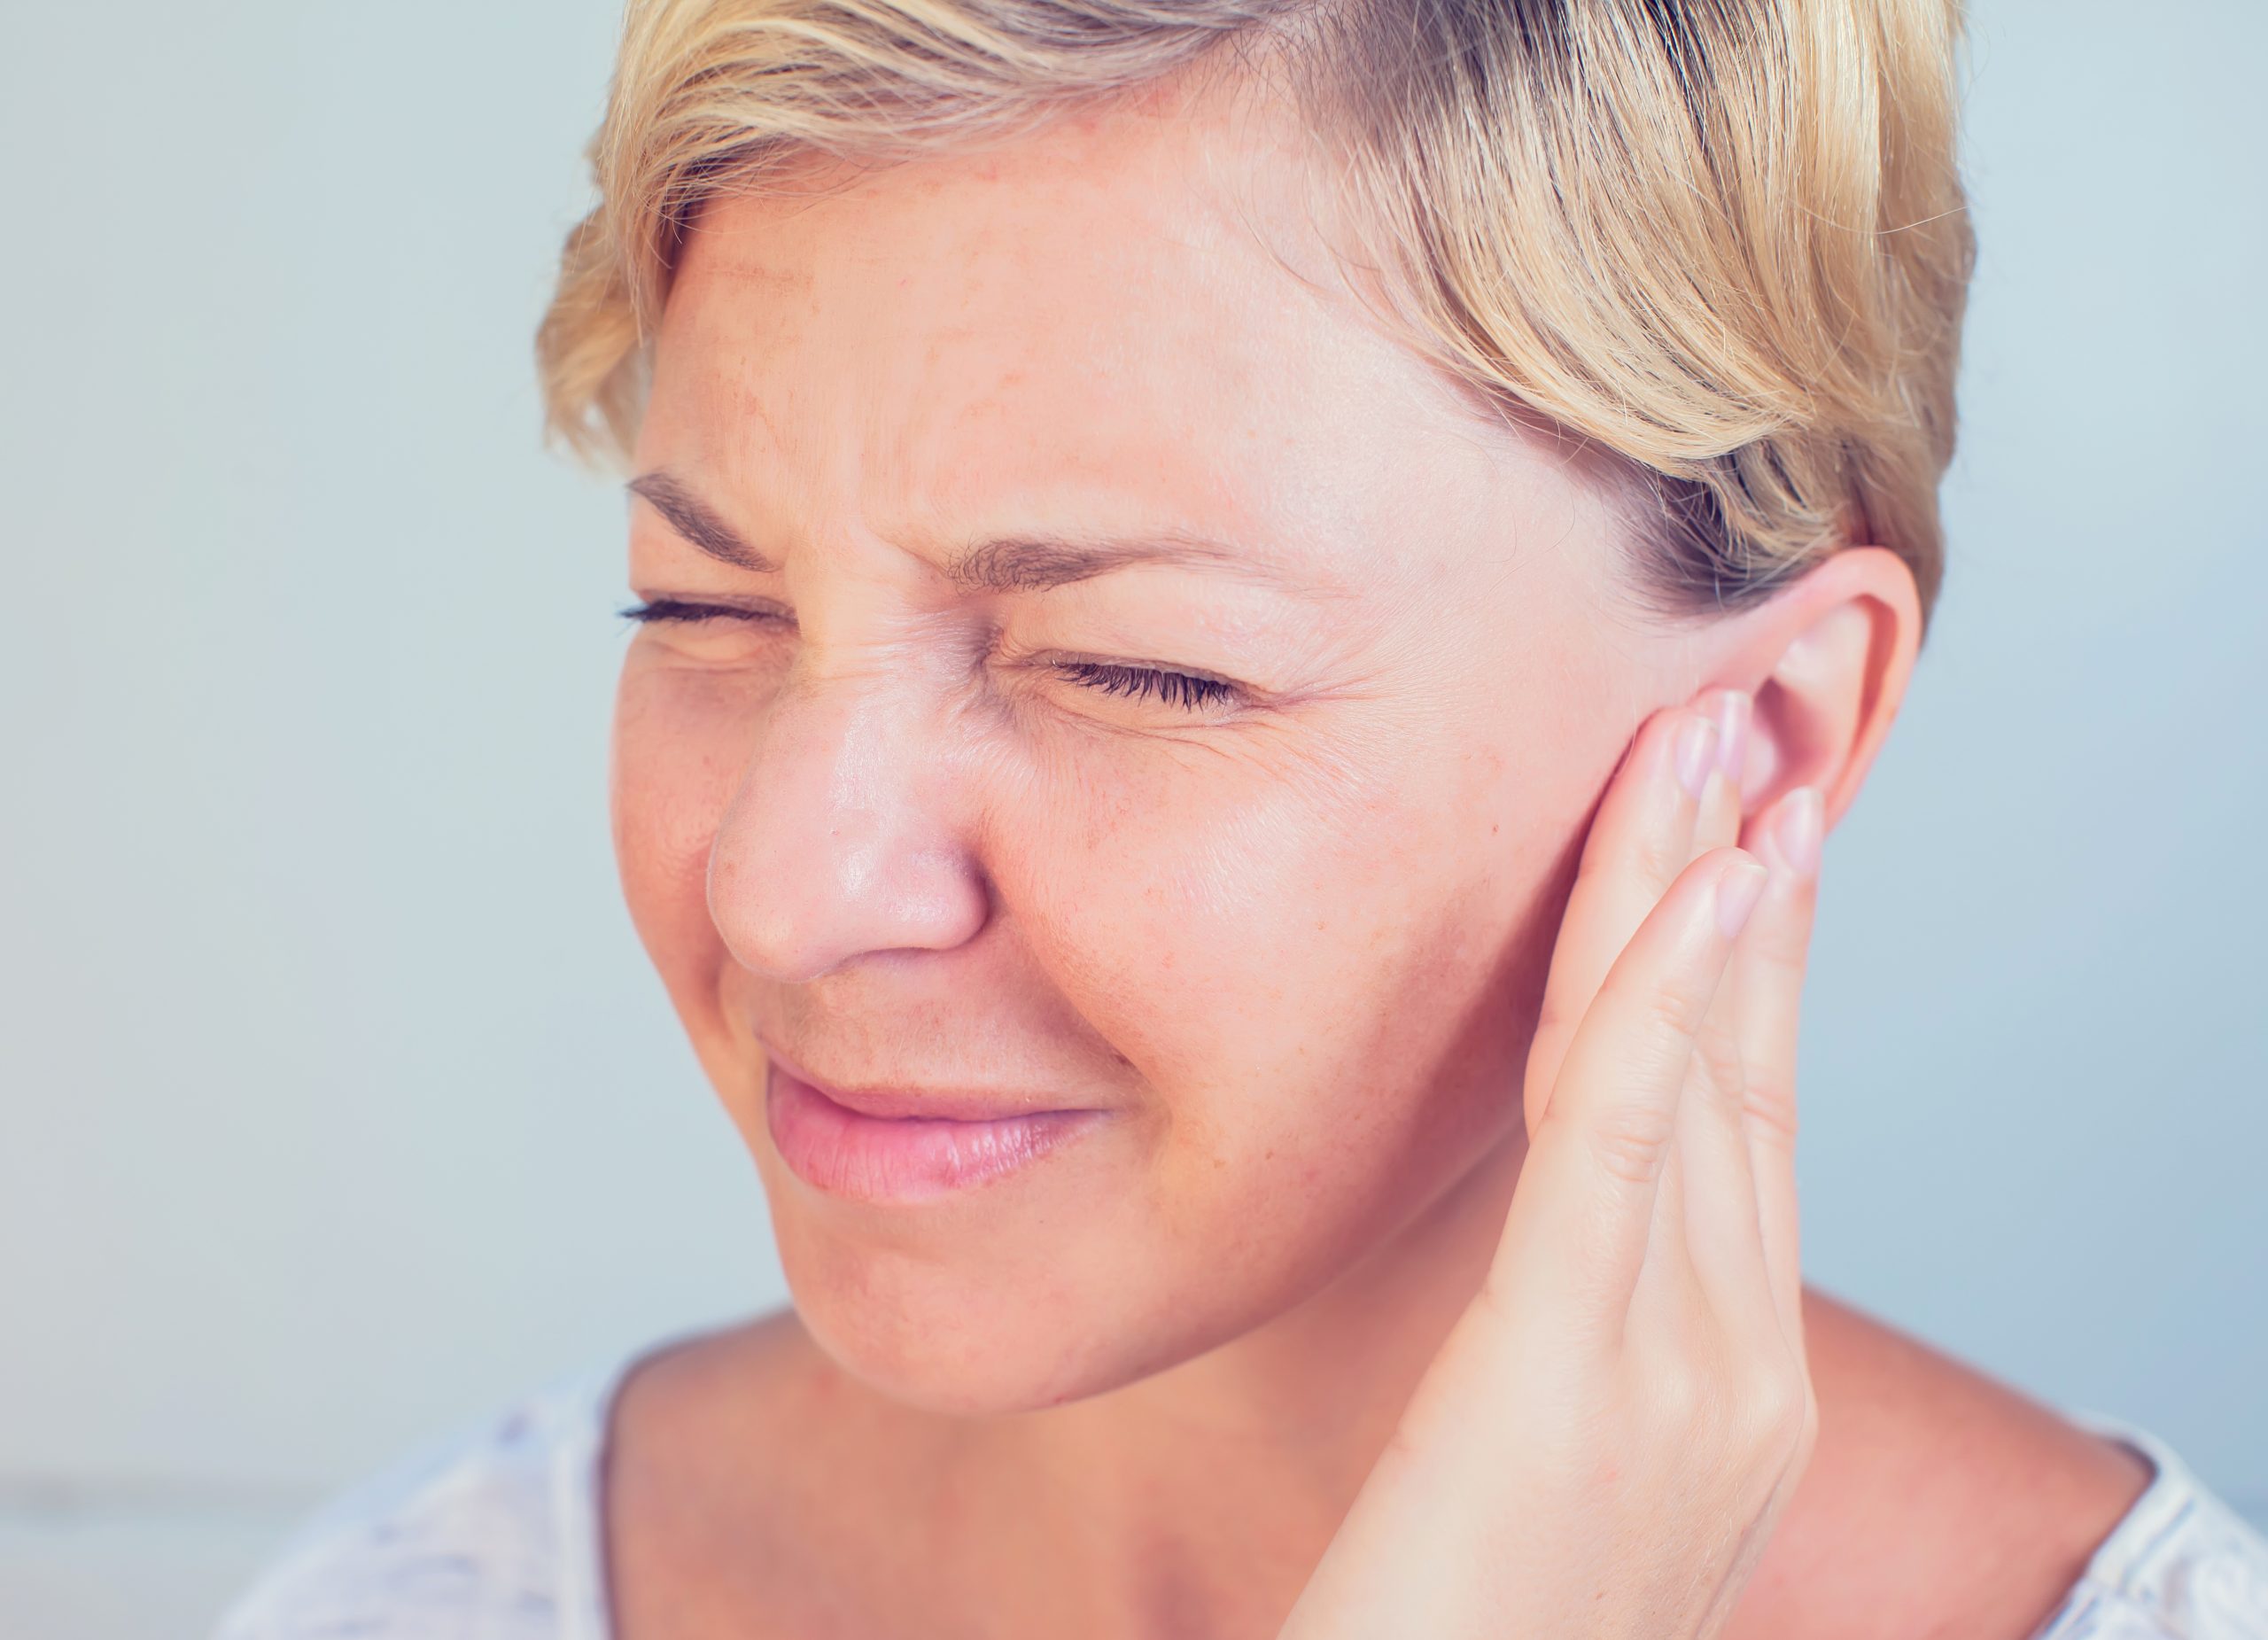 Noise pollution’s effect on hearing health